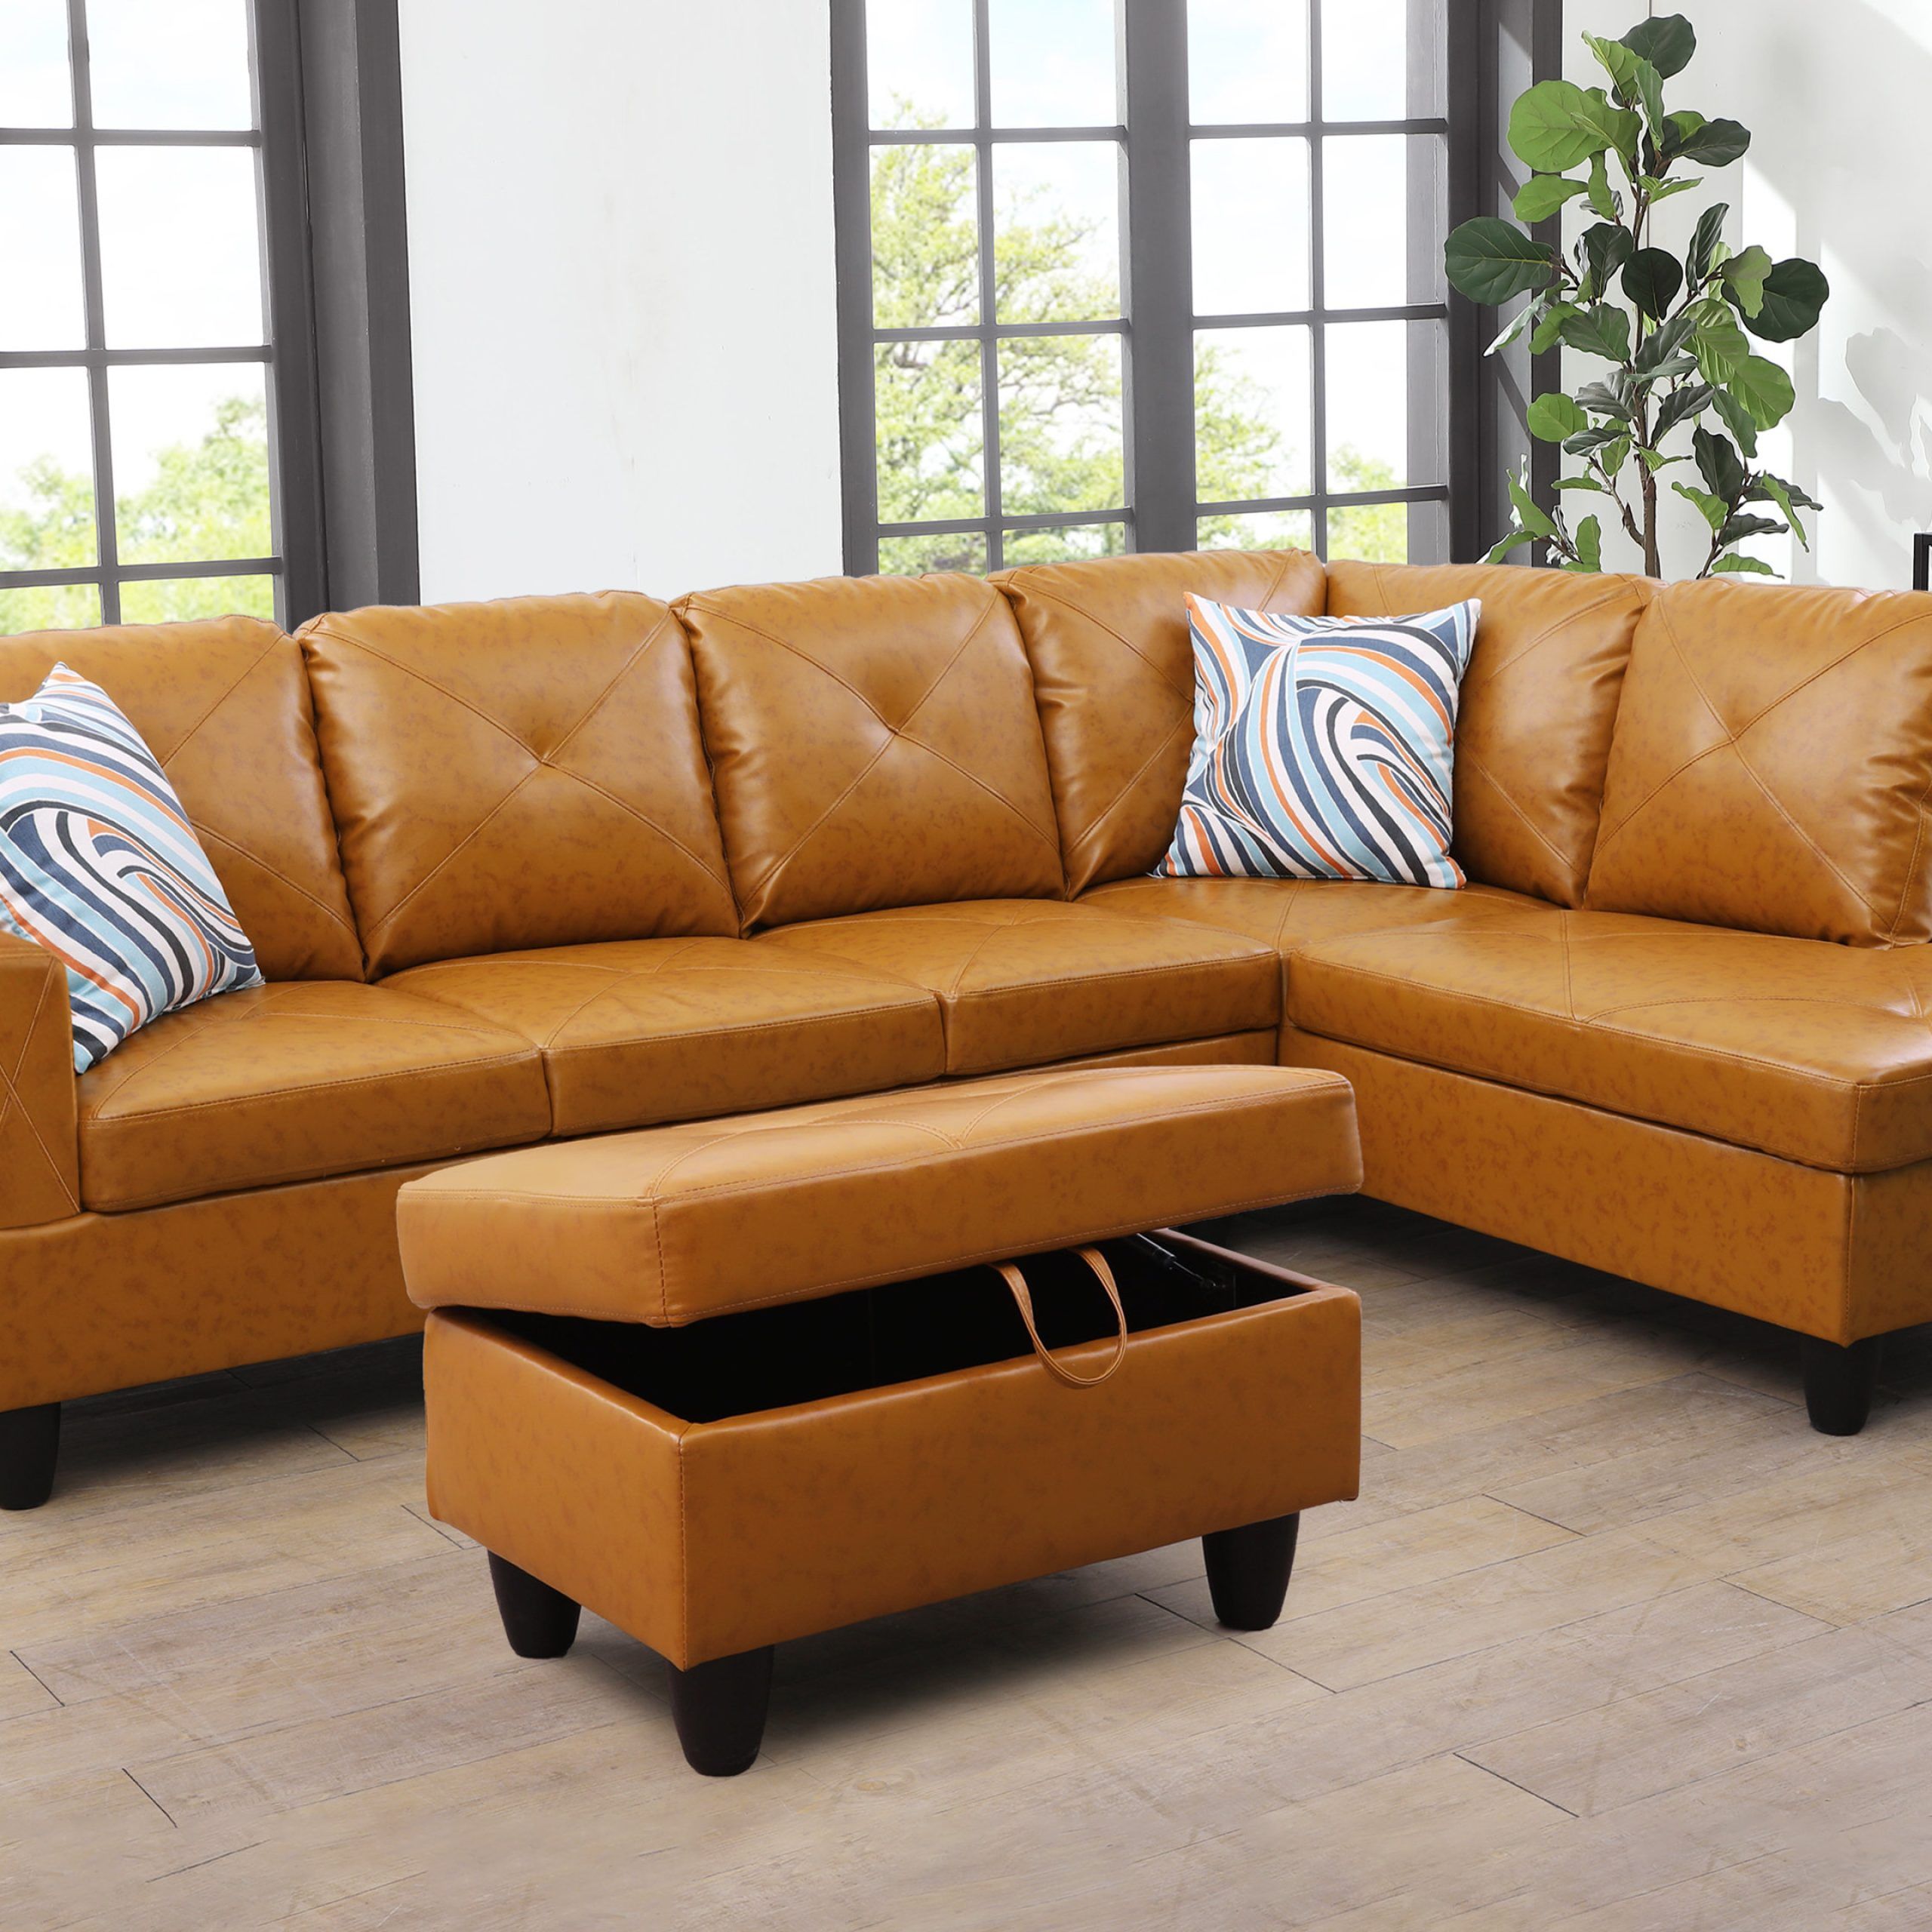 Ebern Designs 3 – Piece Vegan Leather Sectional & Reviews | Wayfair Pertaining To Faux Leather Sectional Sofa Sets (View 8 of 15)